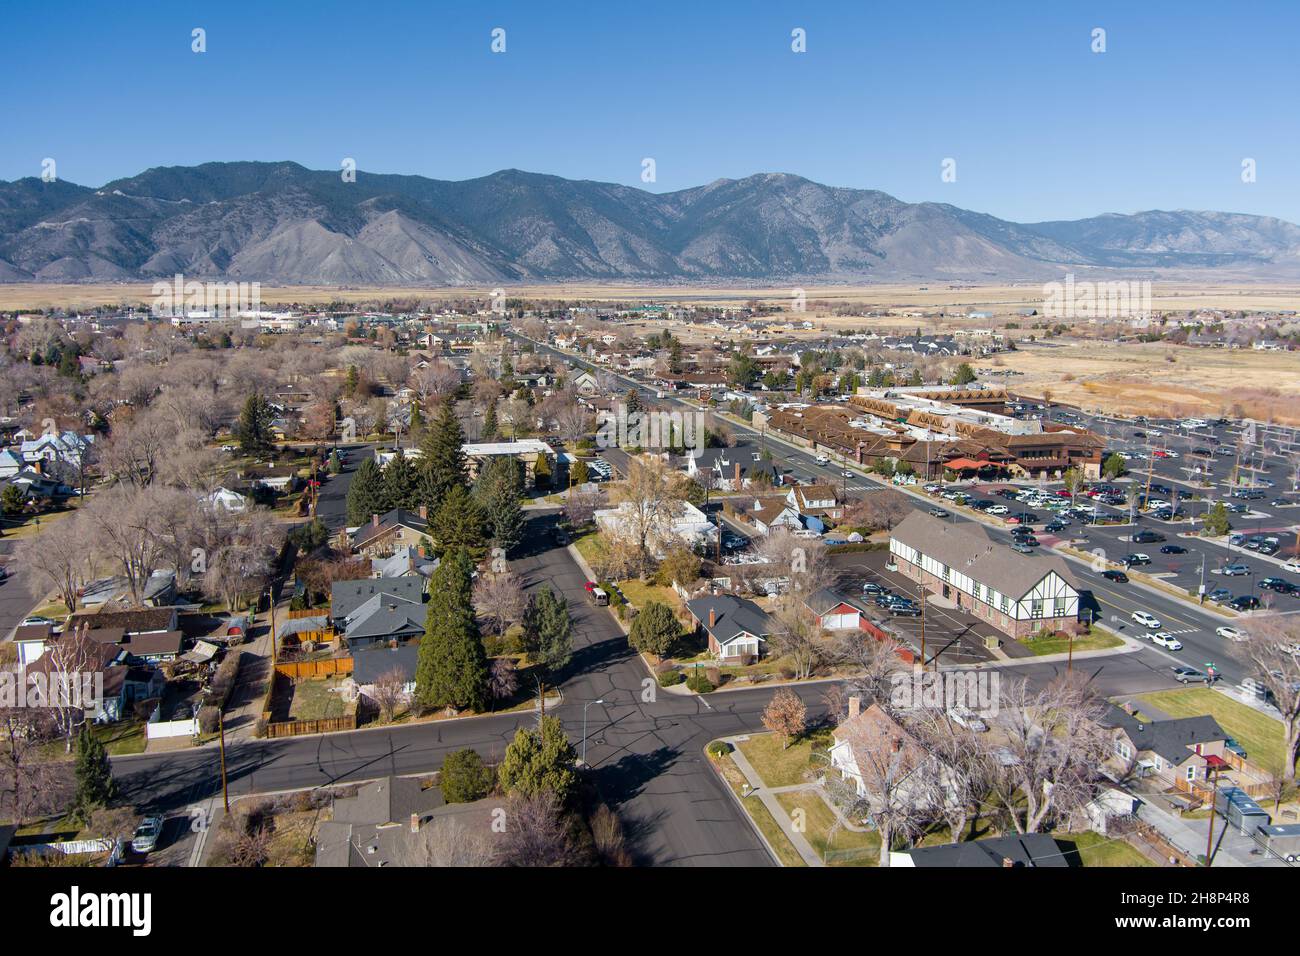 Minden, Nevada - USA - November 29, 2021: Aerial view of Minden and Gardnerville Nevada along Highway 395 in the Carson Valley. Stock Photo